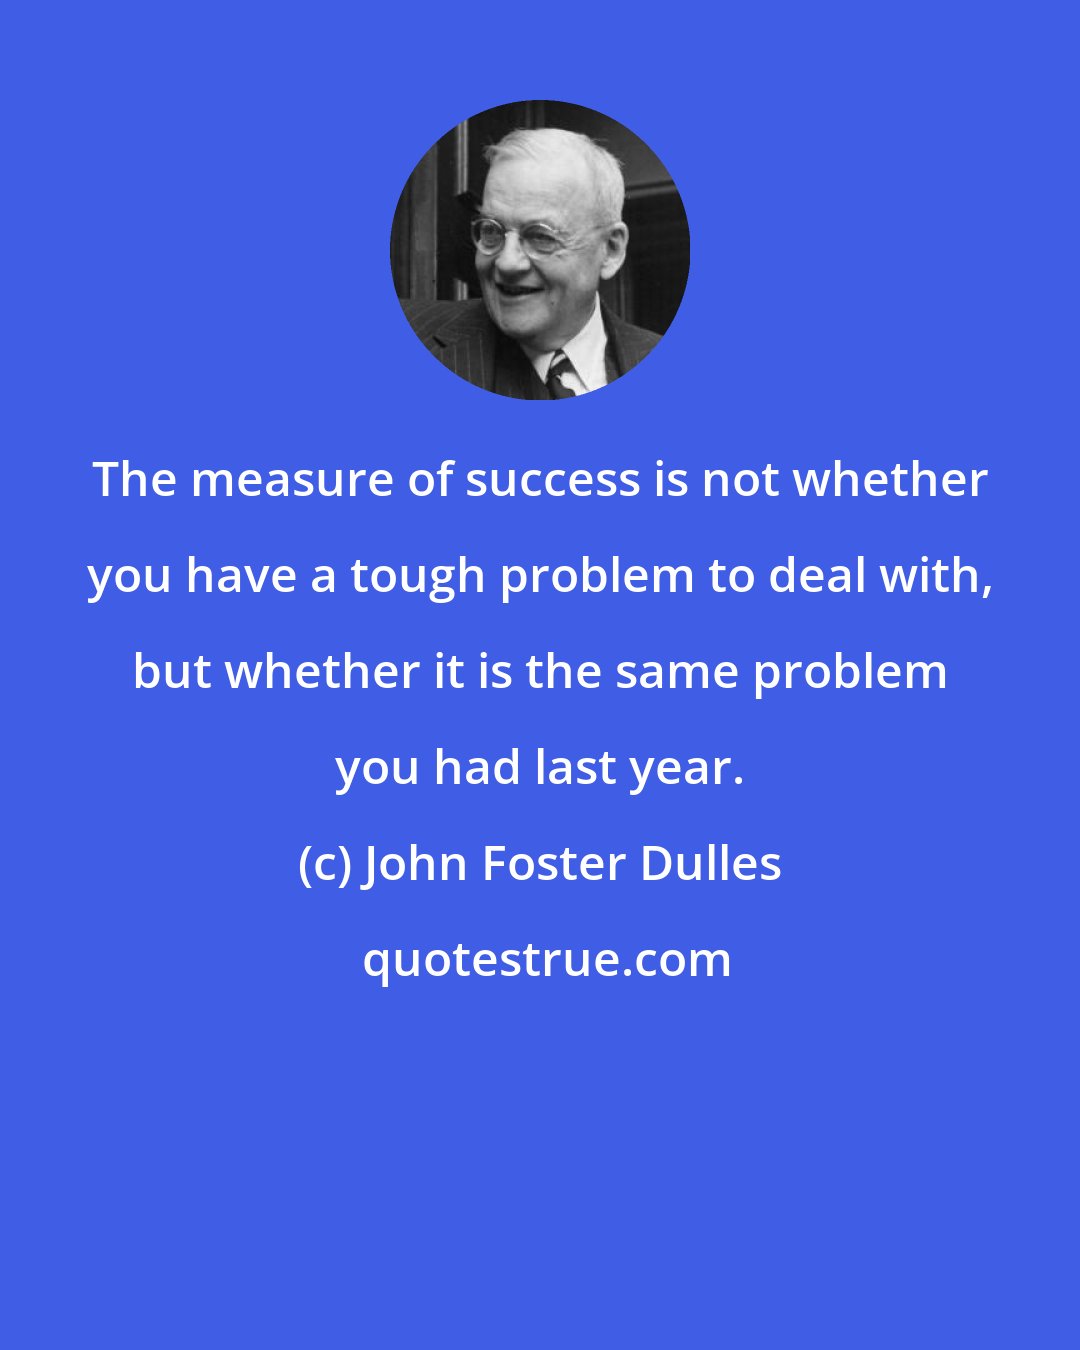 John Foster Dulles: The measure of success is not whether you have a tough problem to deal with, but whether it is the same problem you had last year.